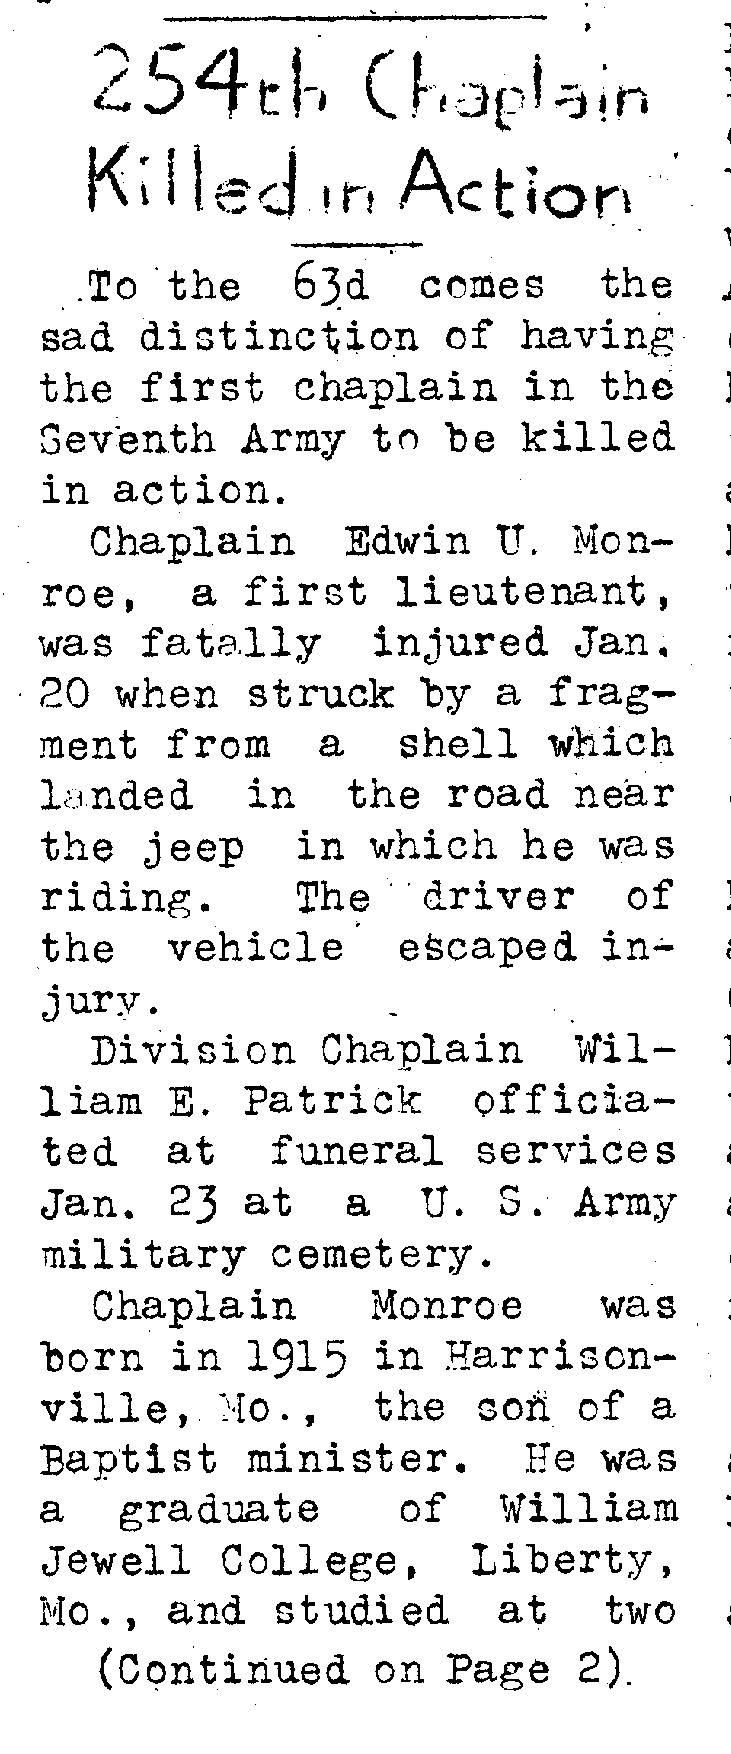 To the 63rd comes the sad distinction of having the first chaplain in the Seventh Army to be killed in action. Chaplain Edwin U. Monroe, a first lieutenant, was fatally injured Jan. 20 when struck by a fragment from a shell which landed in the road near the jeep in which he was riding. The driver of the vehicle escaped injury. Division Chaplain William E. Patrick officiated at funeral services Jan. 23 at a U.S. Army military cemetery. Chaplain Monroe was born in 1915 in Harrisonville, Mo., the son of a Baptist minister. He was a graduate of William, Jewell College. Liberty, Mo., and studied at two Southern Baptist ceminaries. He was commissioned last May. From July to Oct. 20 he was chaplain of the 253d Inf. Another casualty among 63d Div. chaplains was chaplain Raphael H. Miller, Jr 255th Inf., who was wounded Jan. 3. The Purple Heart has been awarded to the chaplain whose home is in Indianapolis.